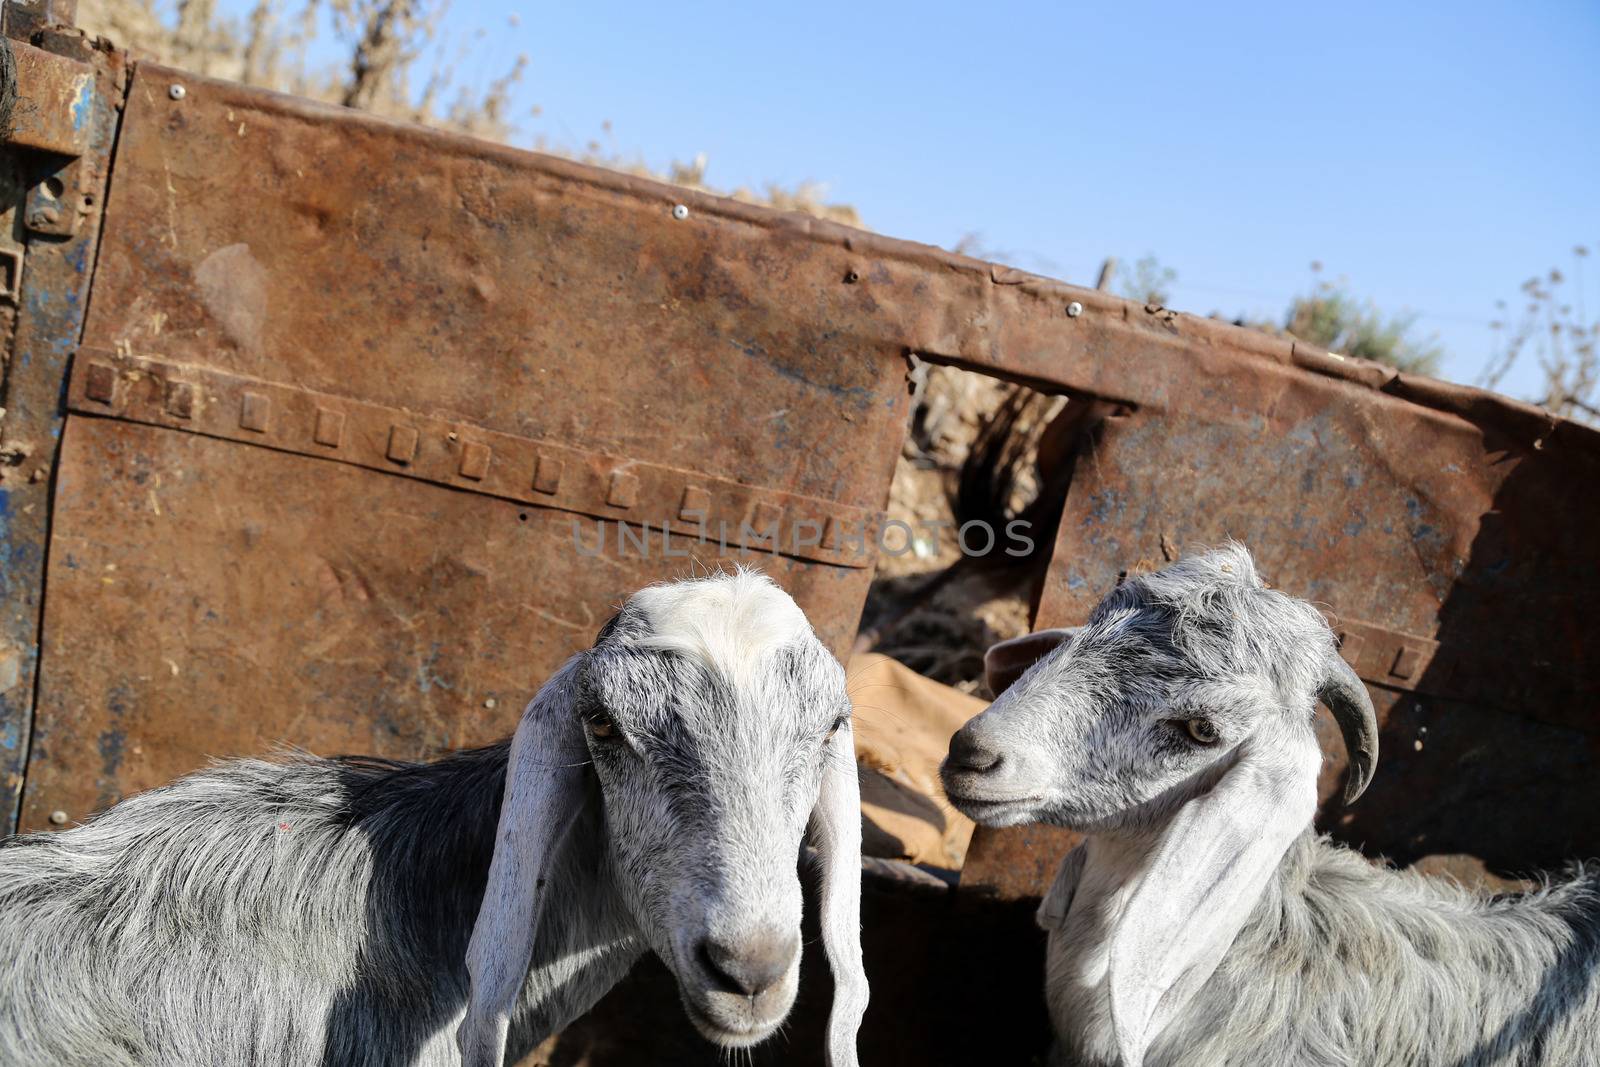 PALESTINE, Gaza: Two sheep are pictured at the main livestock market in northern Gaza on September 18, 2015 as Palestinians prepare for the upcoming Eid al-Adha festival.Also known as the Festival of Sacrifice, the three-day holiday marks the end of the annual pilgrimage to Mecca and commemorates the willingness of the Prophet Ibrahim (Abraham to Christians and Jews) to sacrifice his son, Ismail, on God's command. 